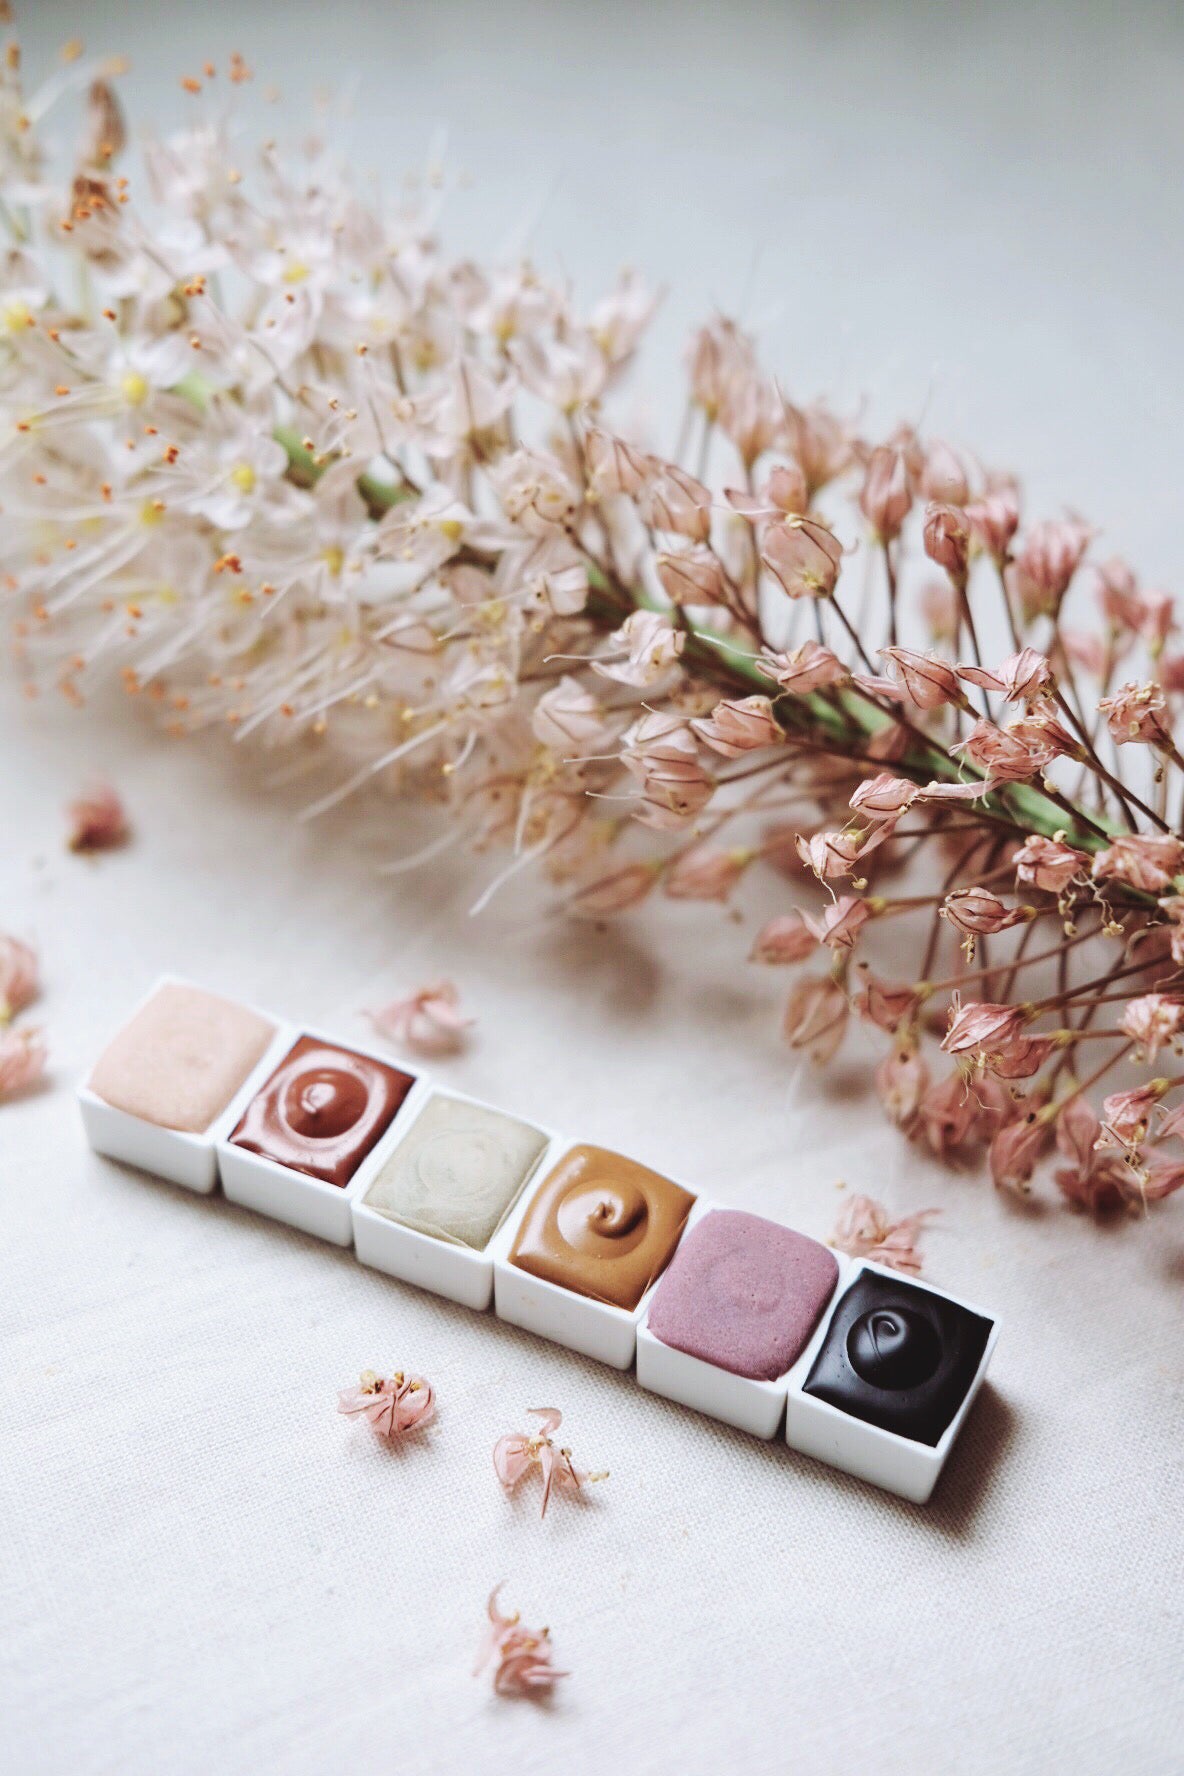 RESERVE for Maja + Foxtail Lily + Limited edition Gemstone Earth Mineral watercolor palette